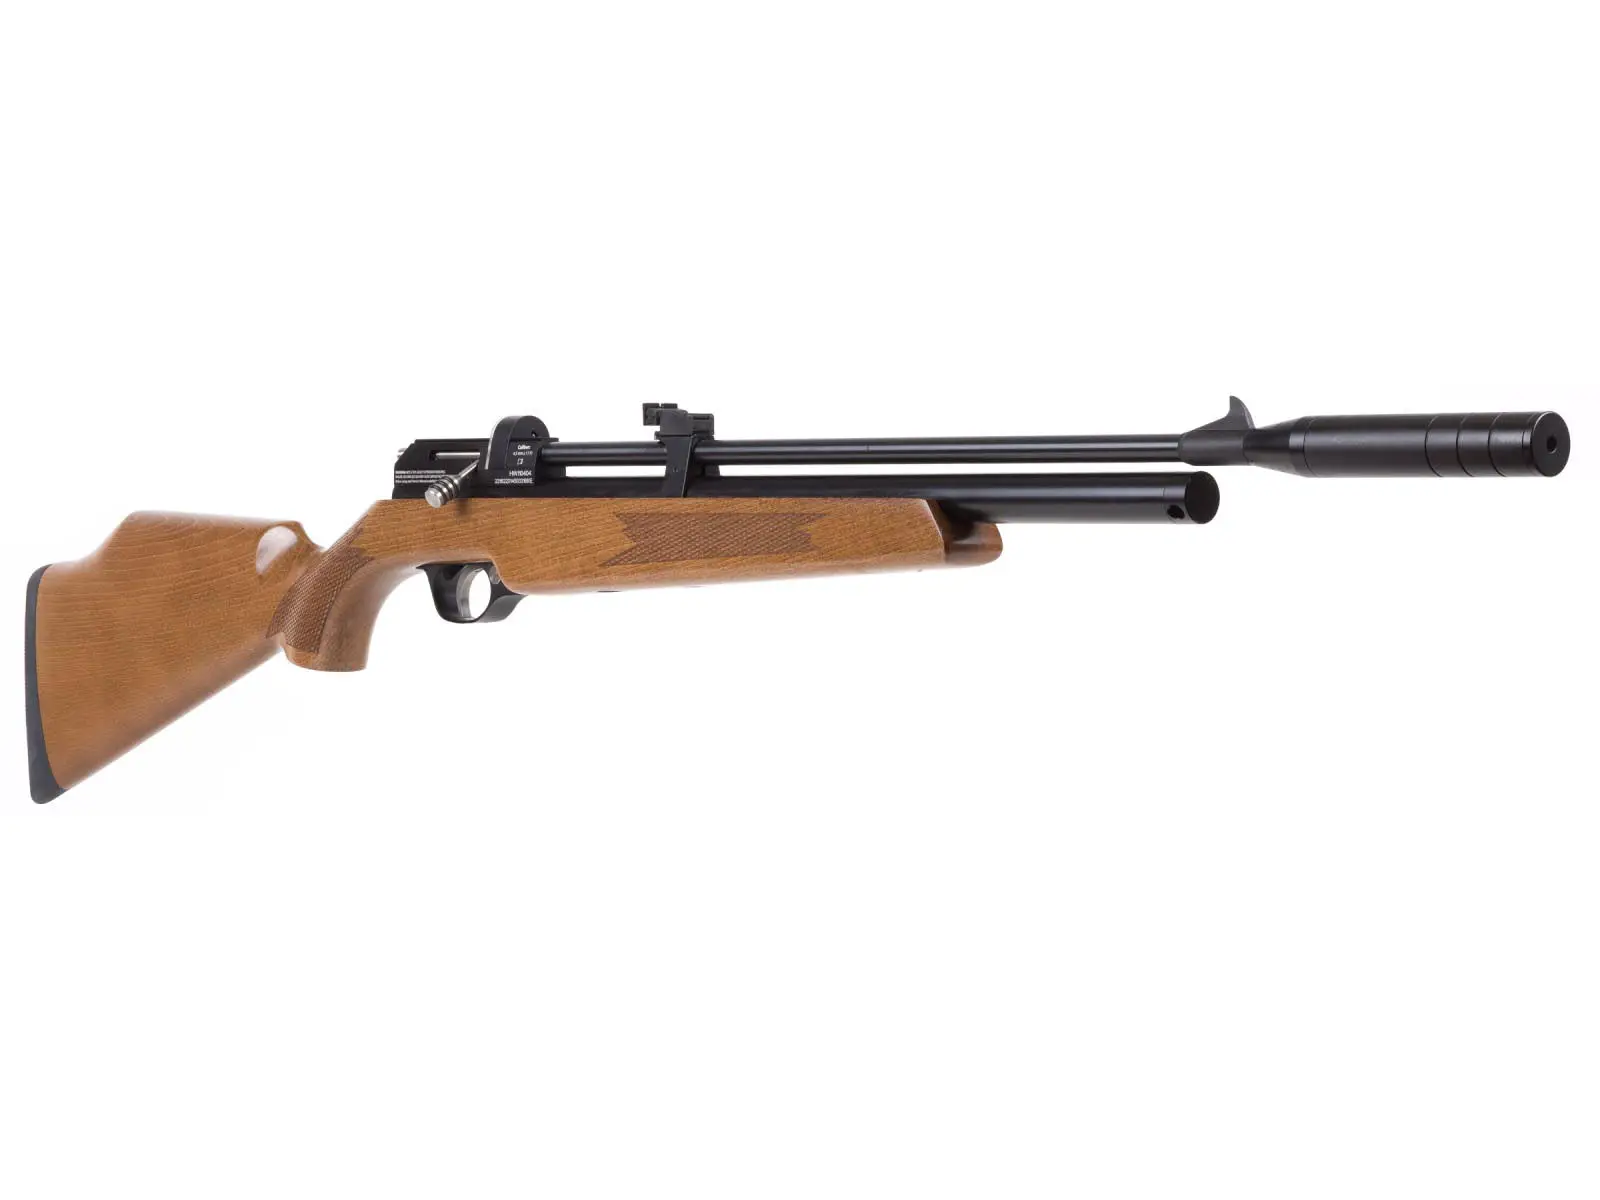 storm2 Best PCP air rifles - 15 of the best PCP guns you can buy right now (Reviews and Buying Guide 2022)